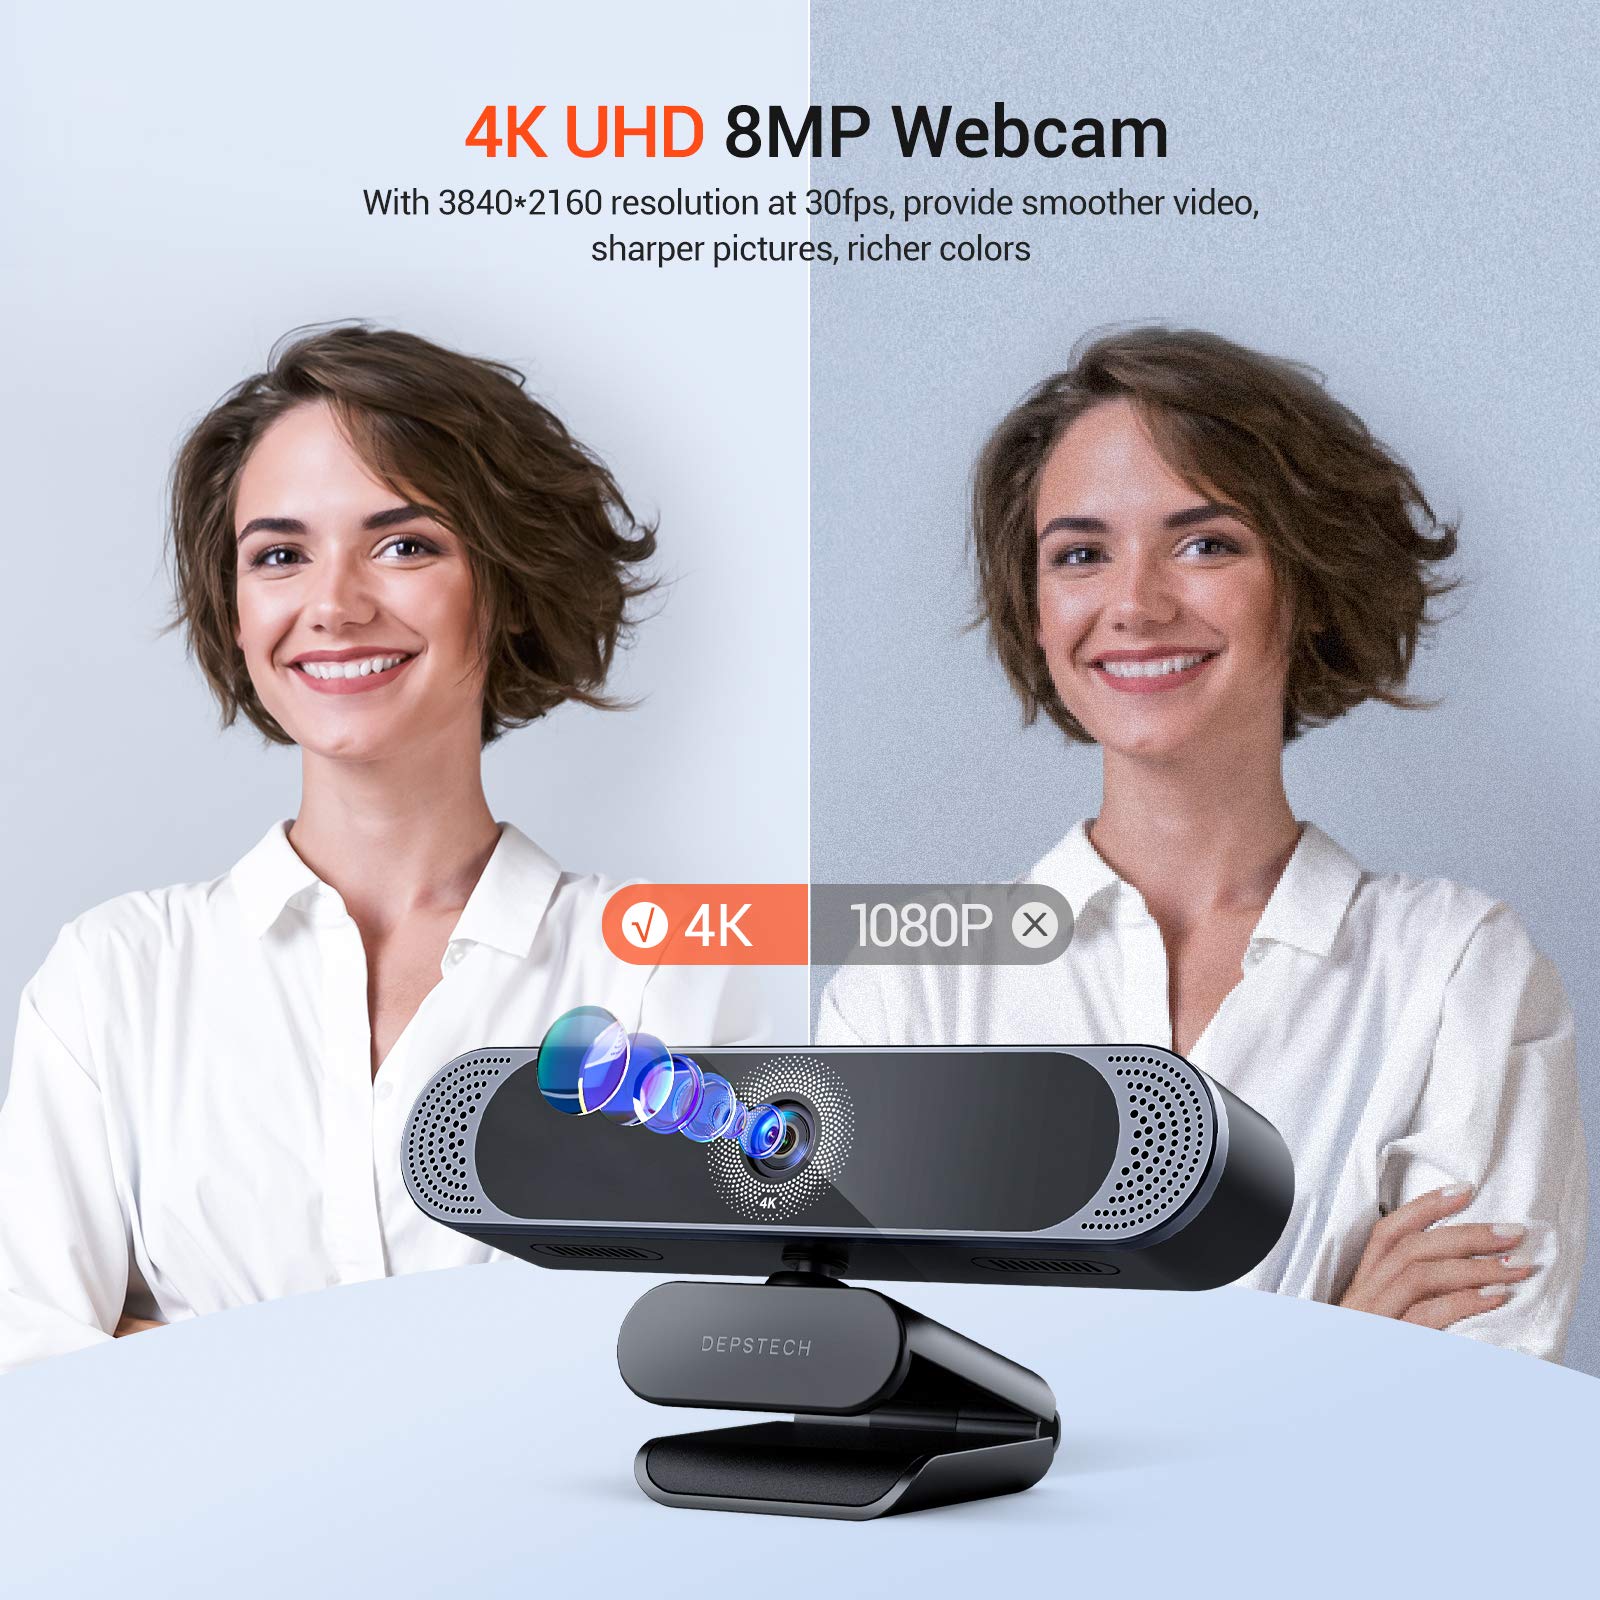 4K Webcam, DEPSTECH DW49 HD 8MP Sony Sensor Autofocus Webcam with Microphone, Privacy Cover and Tripod, Plug Play USB Computer Web Camera for Pro Streaming/Online Teaching/Video Calling/Zoom/Skype